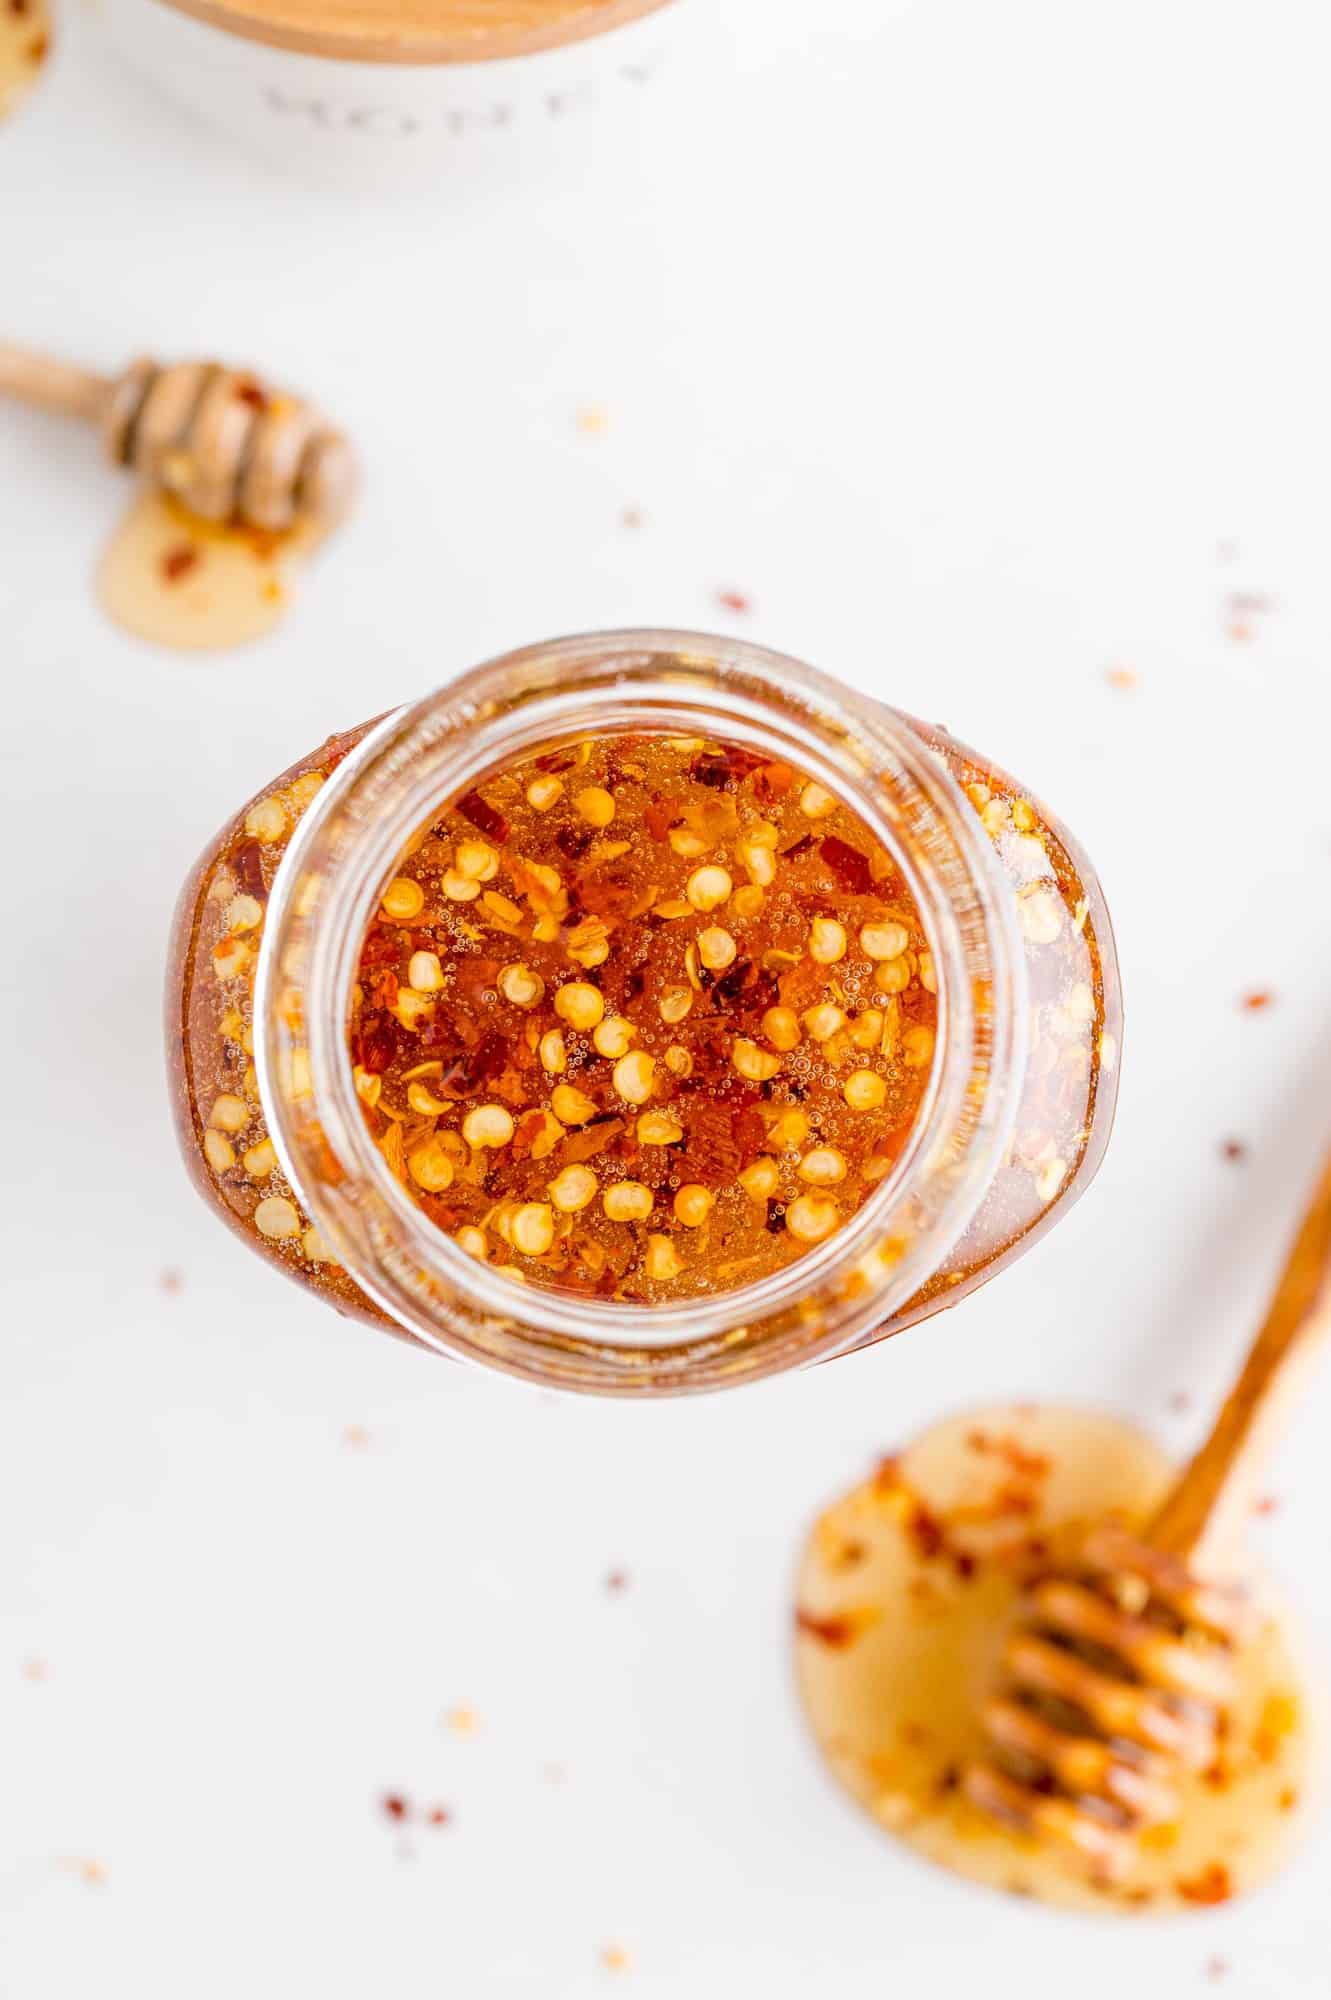 Overhead view of hot honey in a jar and on a dipper on white surface.